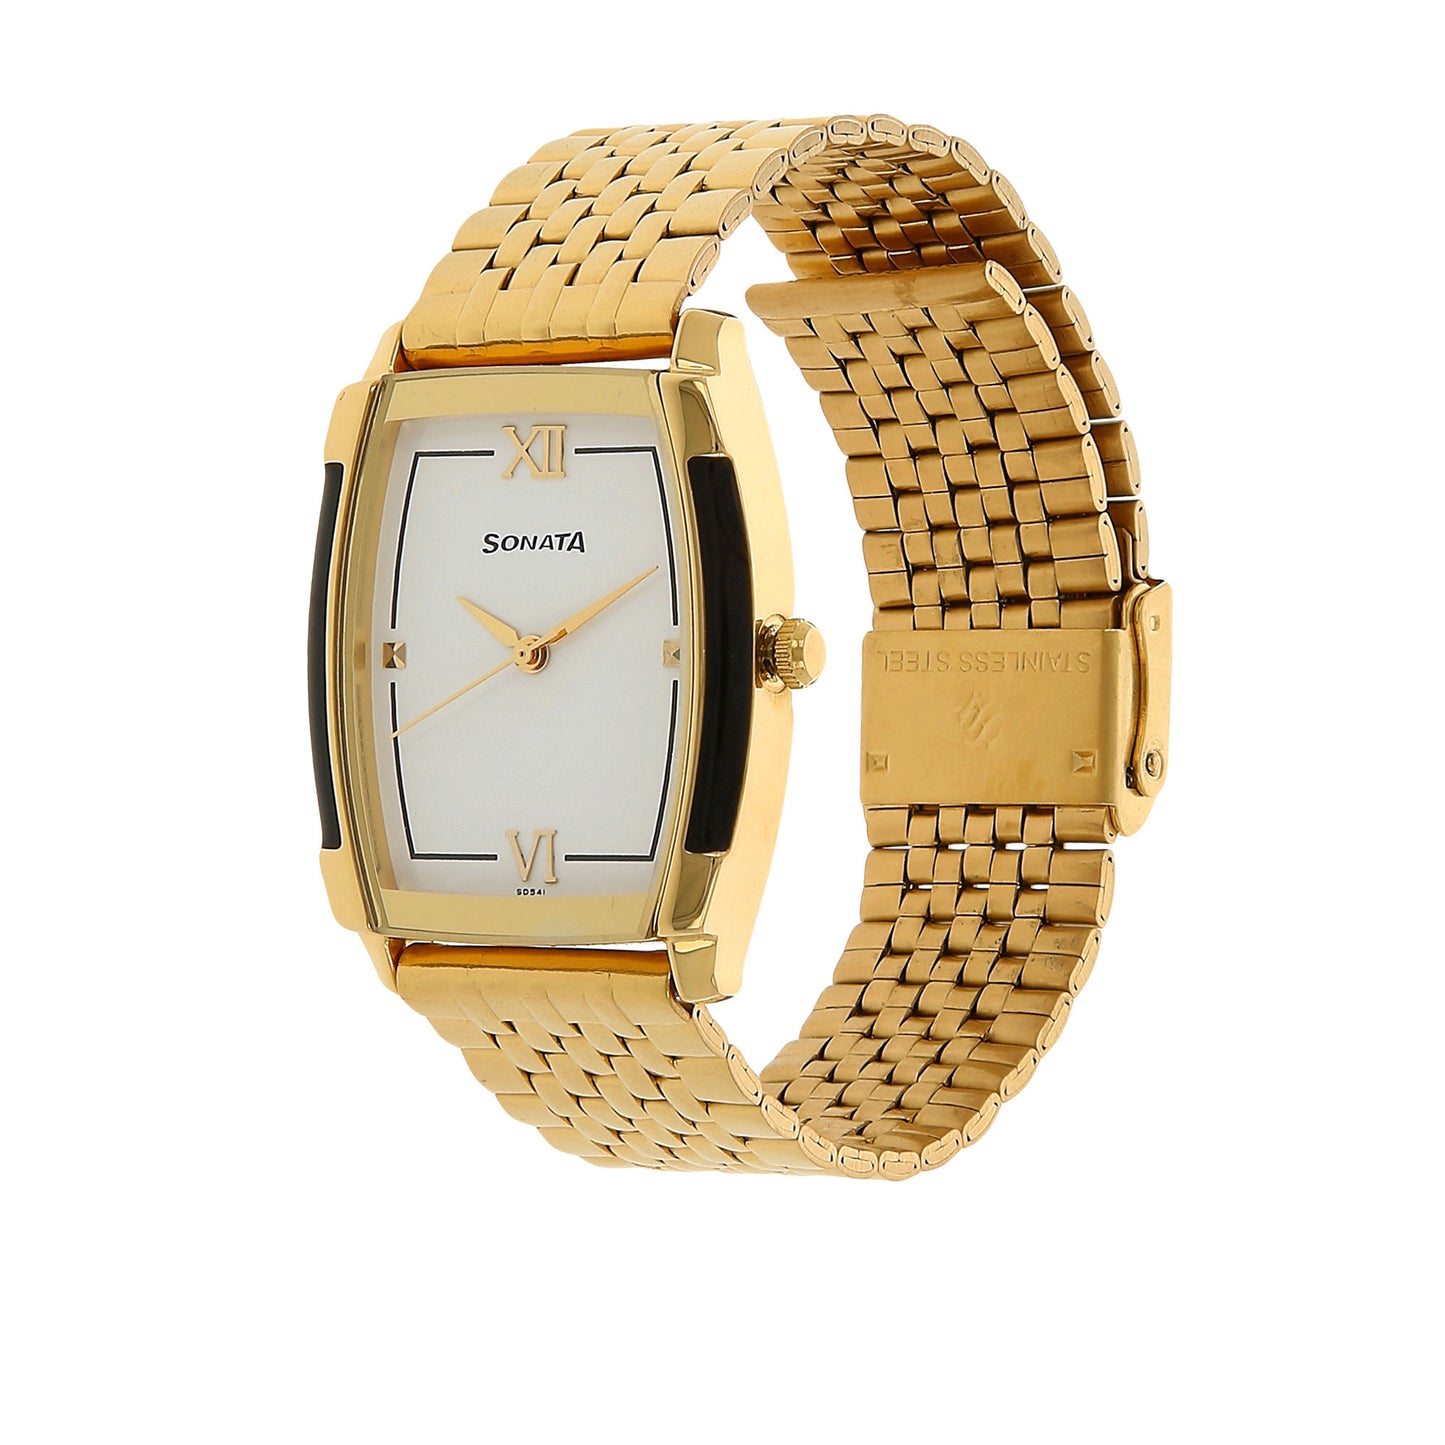 White Dial Golden Stainless Steel Strap Watch NN7080YM01